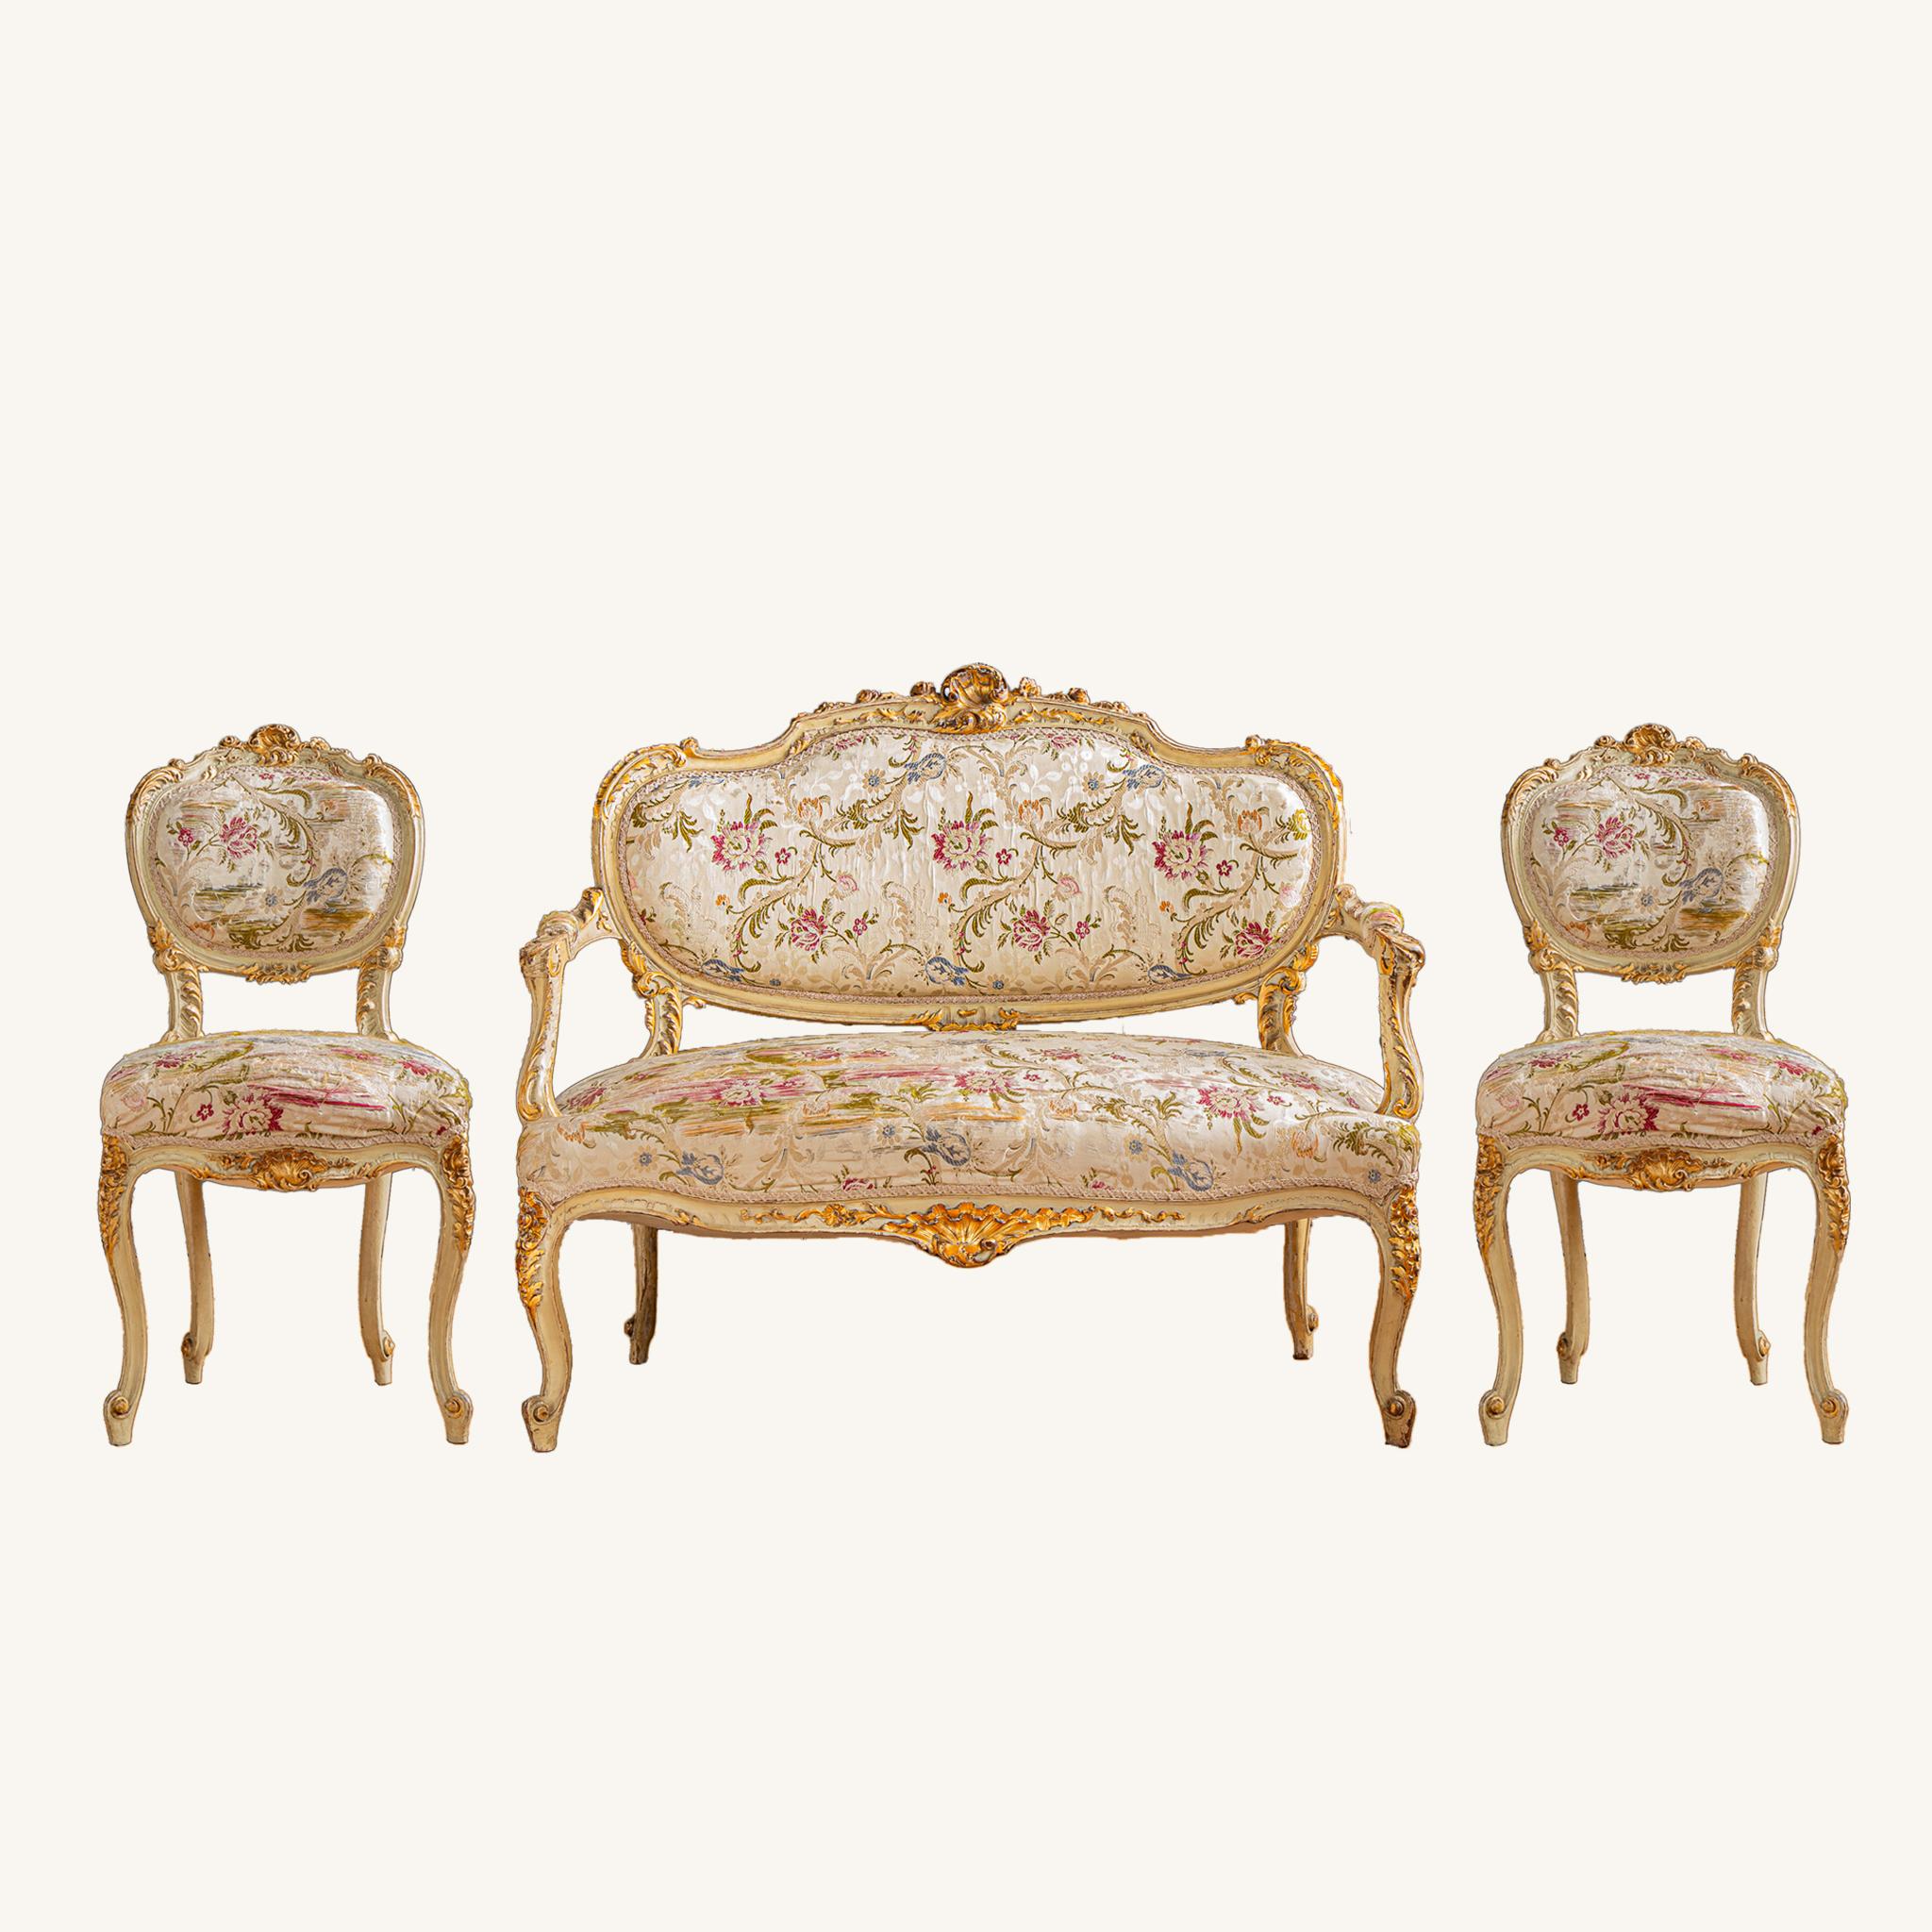 19th Century Italian Carved Gilt-wood Salon Suite - Sofa, Chairs & Footstools  For Sale 11